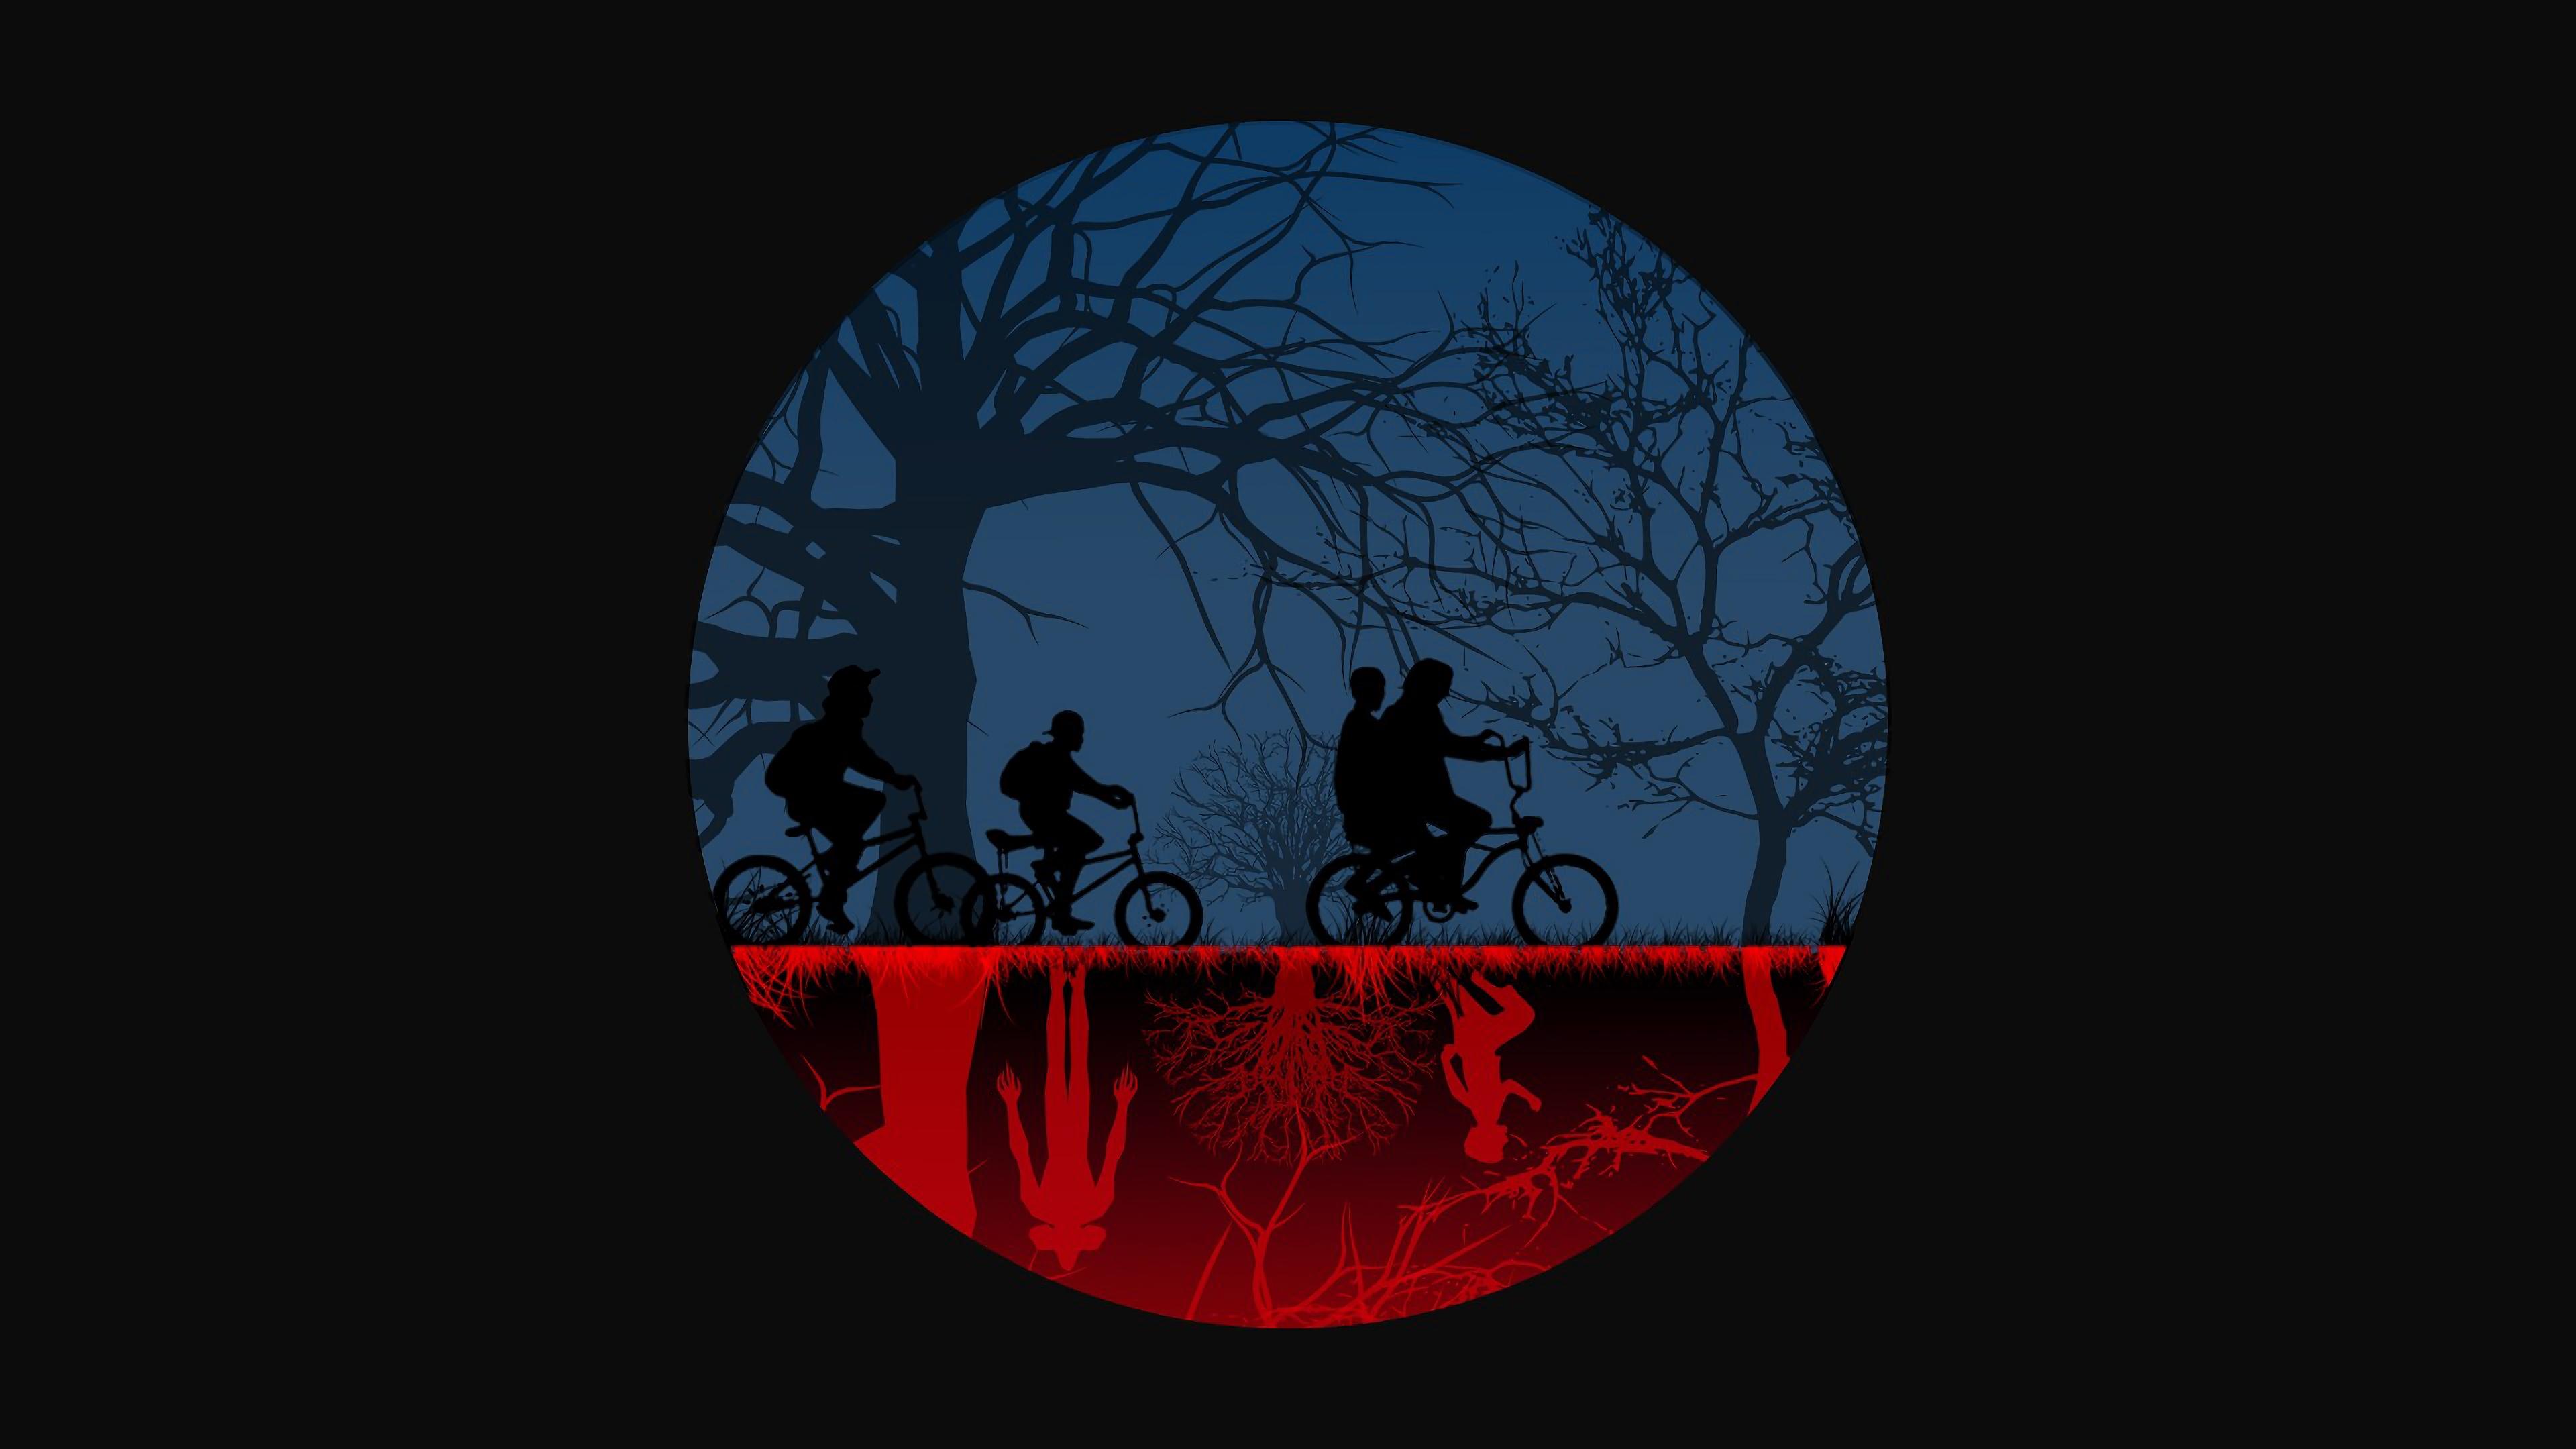 Stranger Things 4 Wallpapers  Top Free Stranger Things 4 Backgrounds   WallpaperAccess